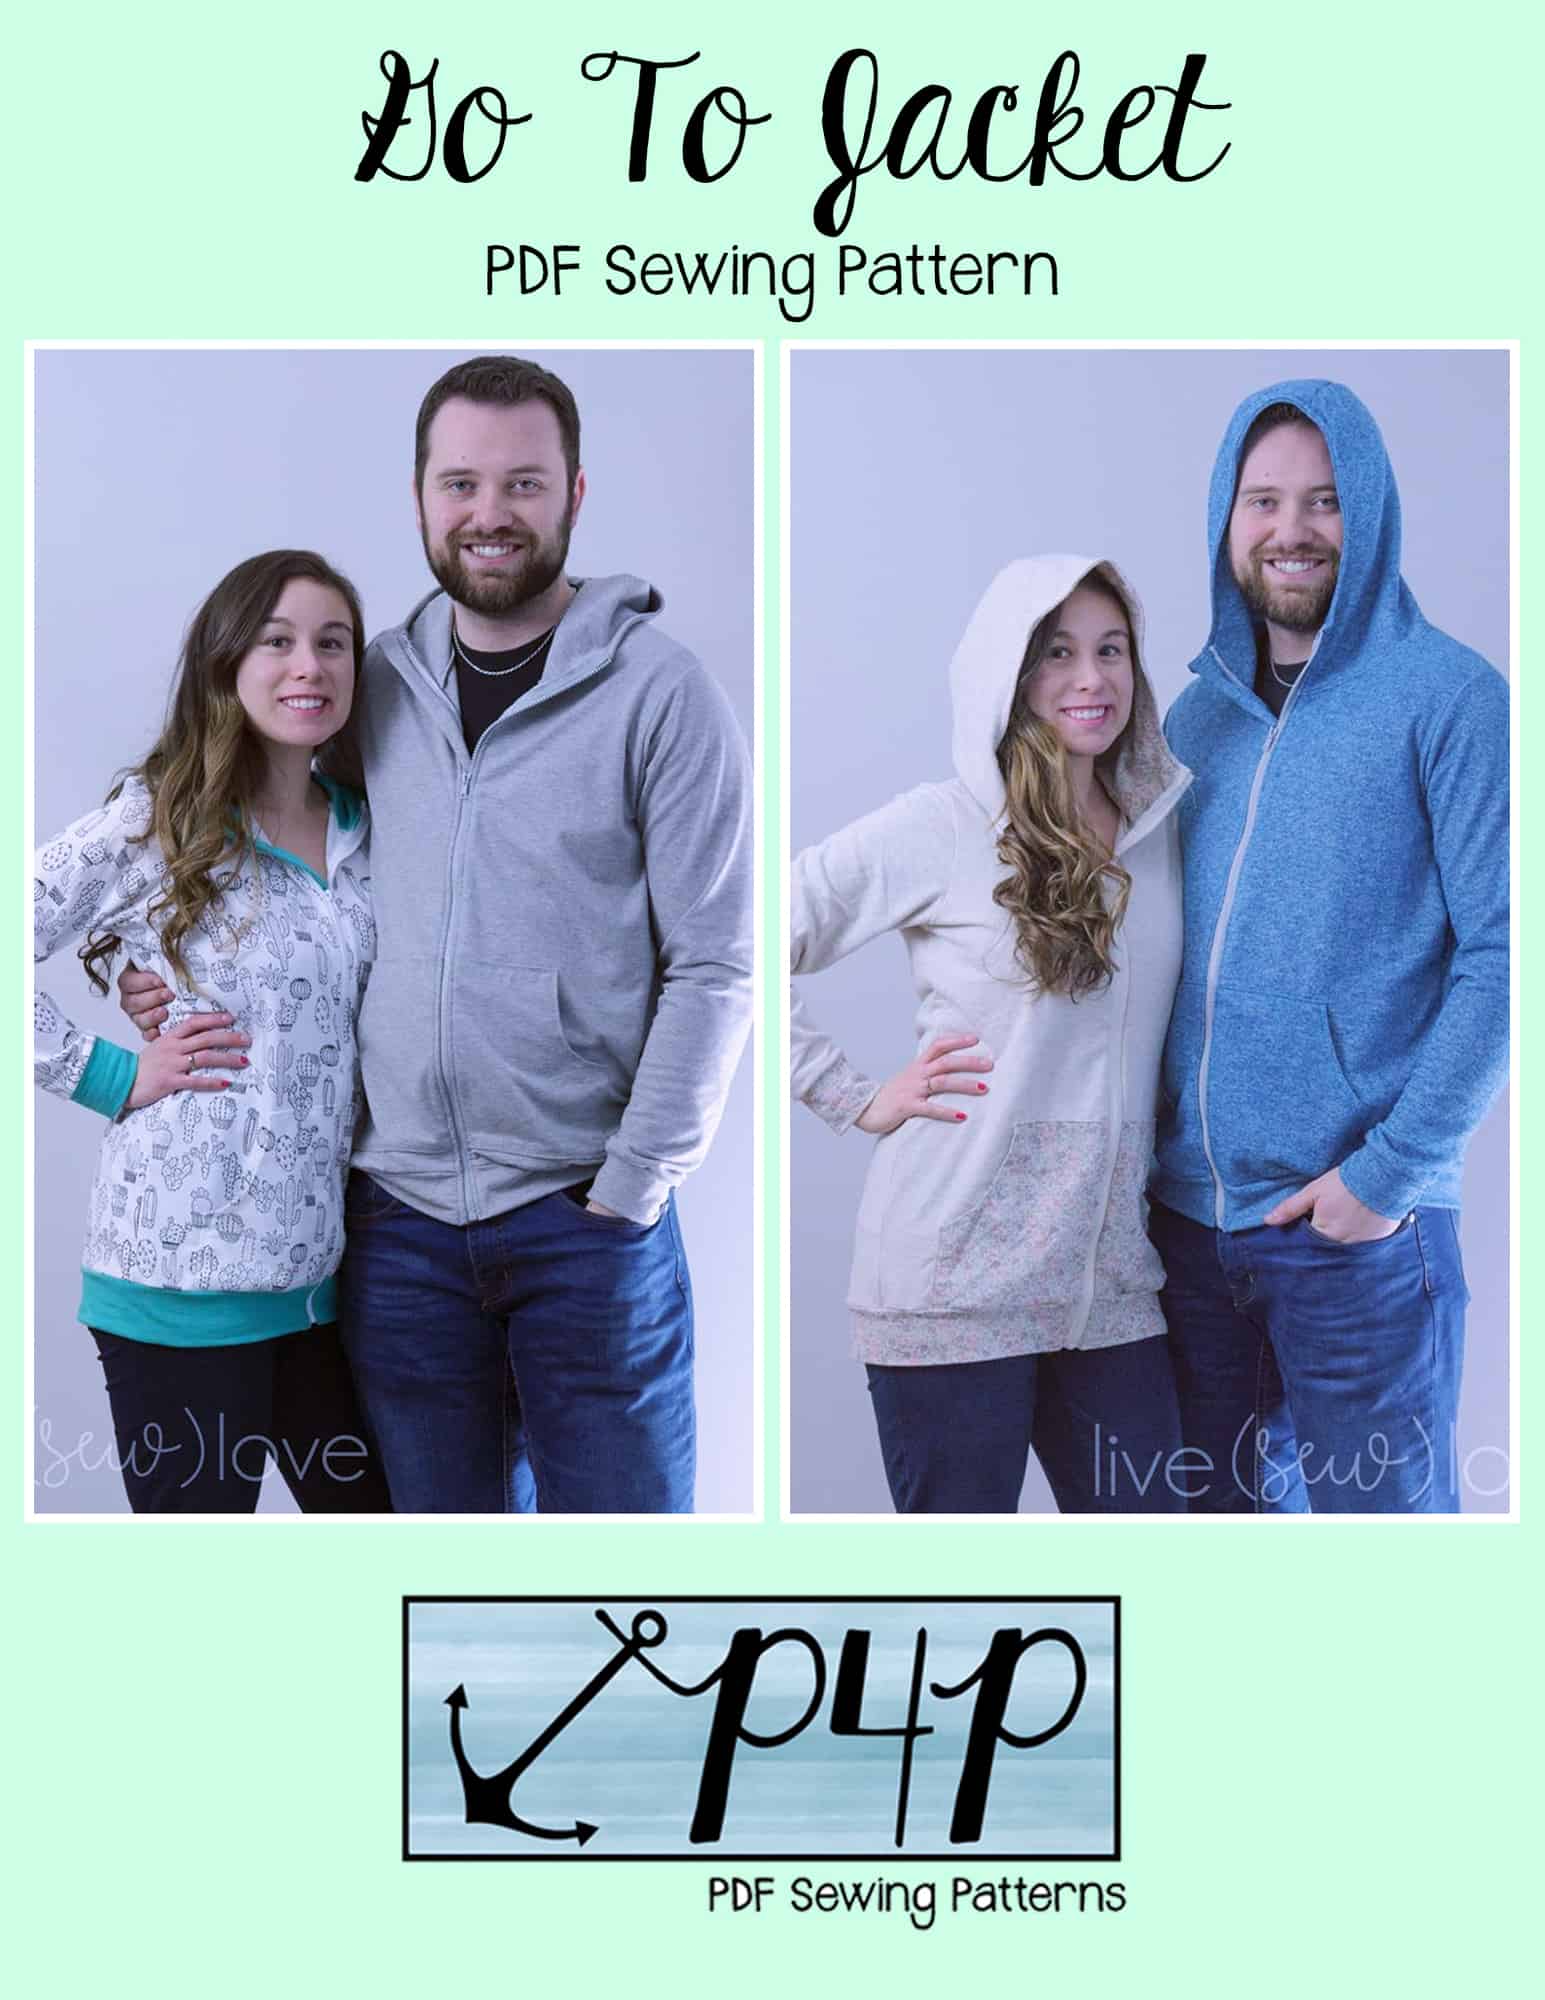 Pattern Storage- Sew it, Win it, Build it- from P4P - Patterns for Pirates